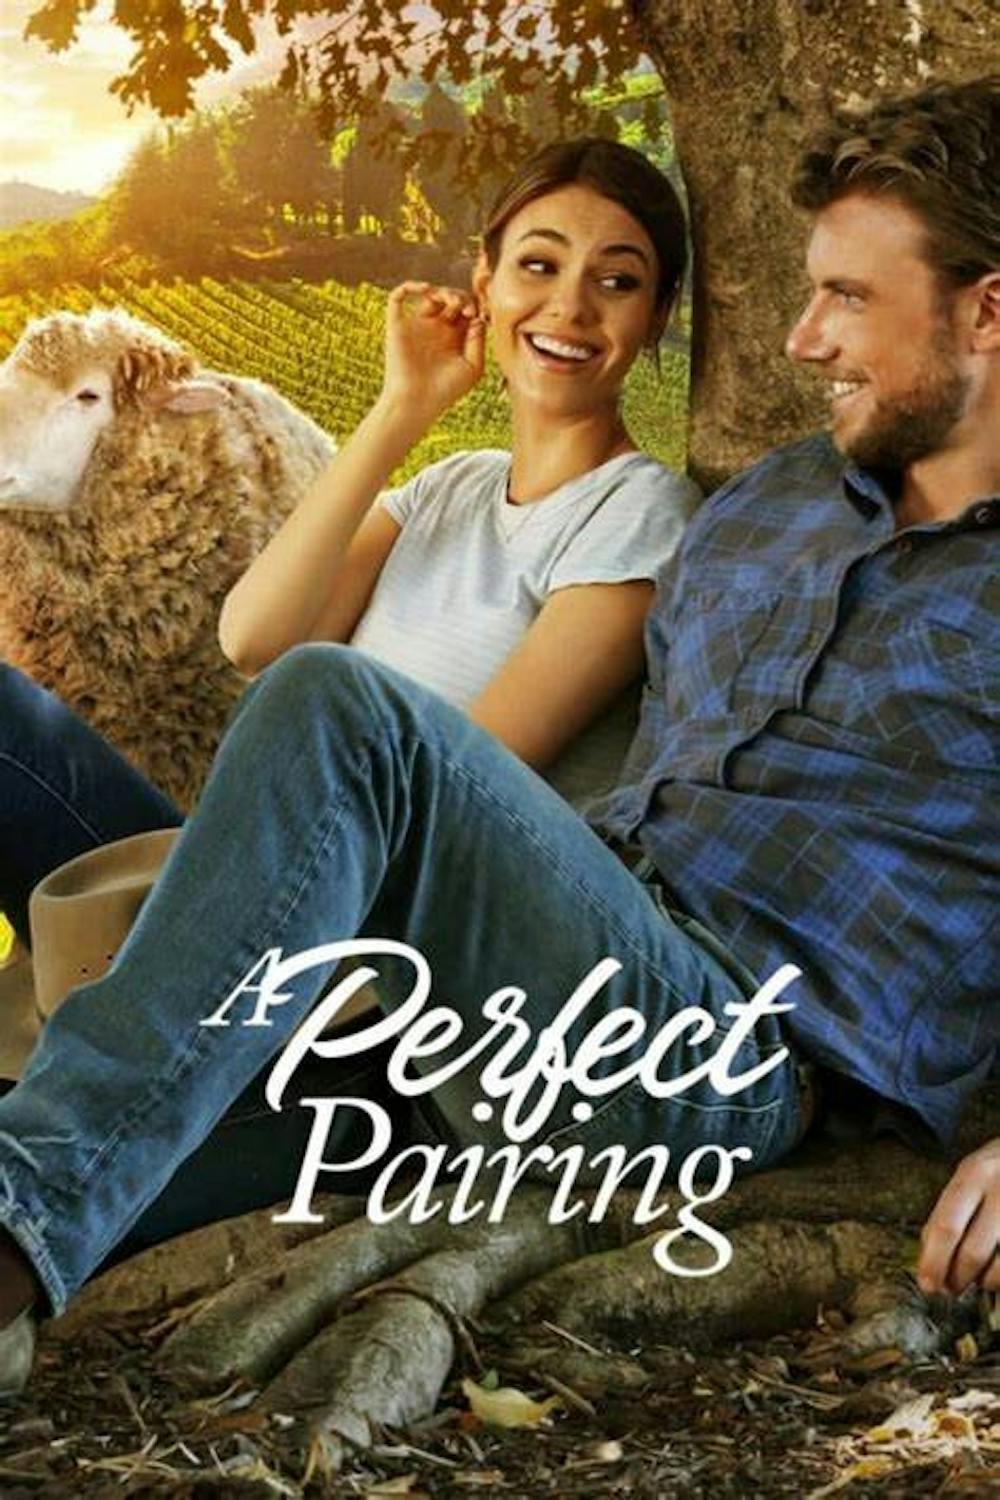 ‘A Perfect Pairing’: A perfectly decent movie